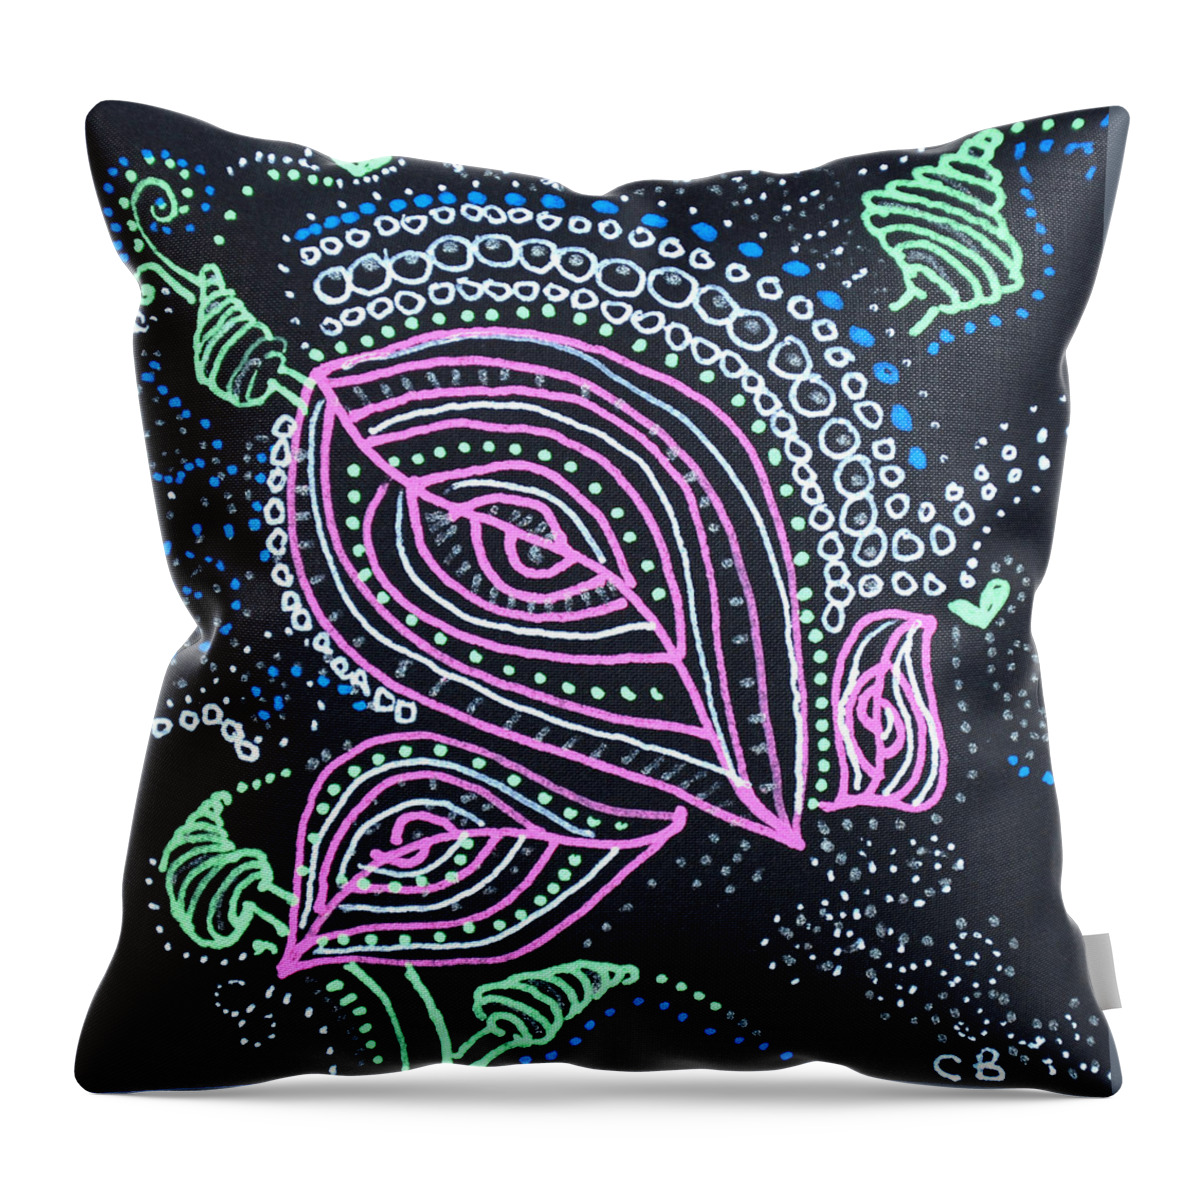 Caregiver Throw Pillow featuring the drawing Zentangle Flower by Carole Brecht